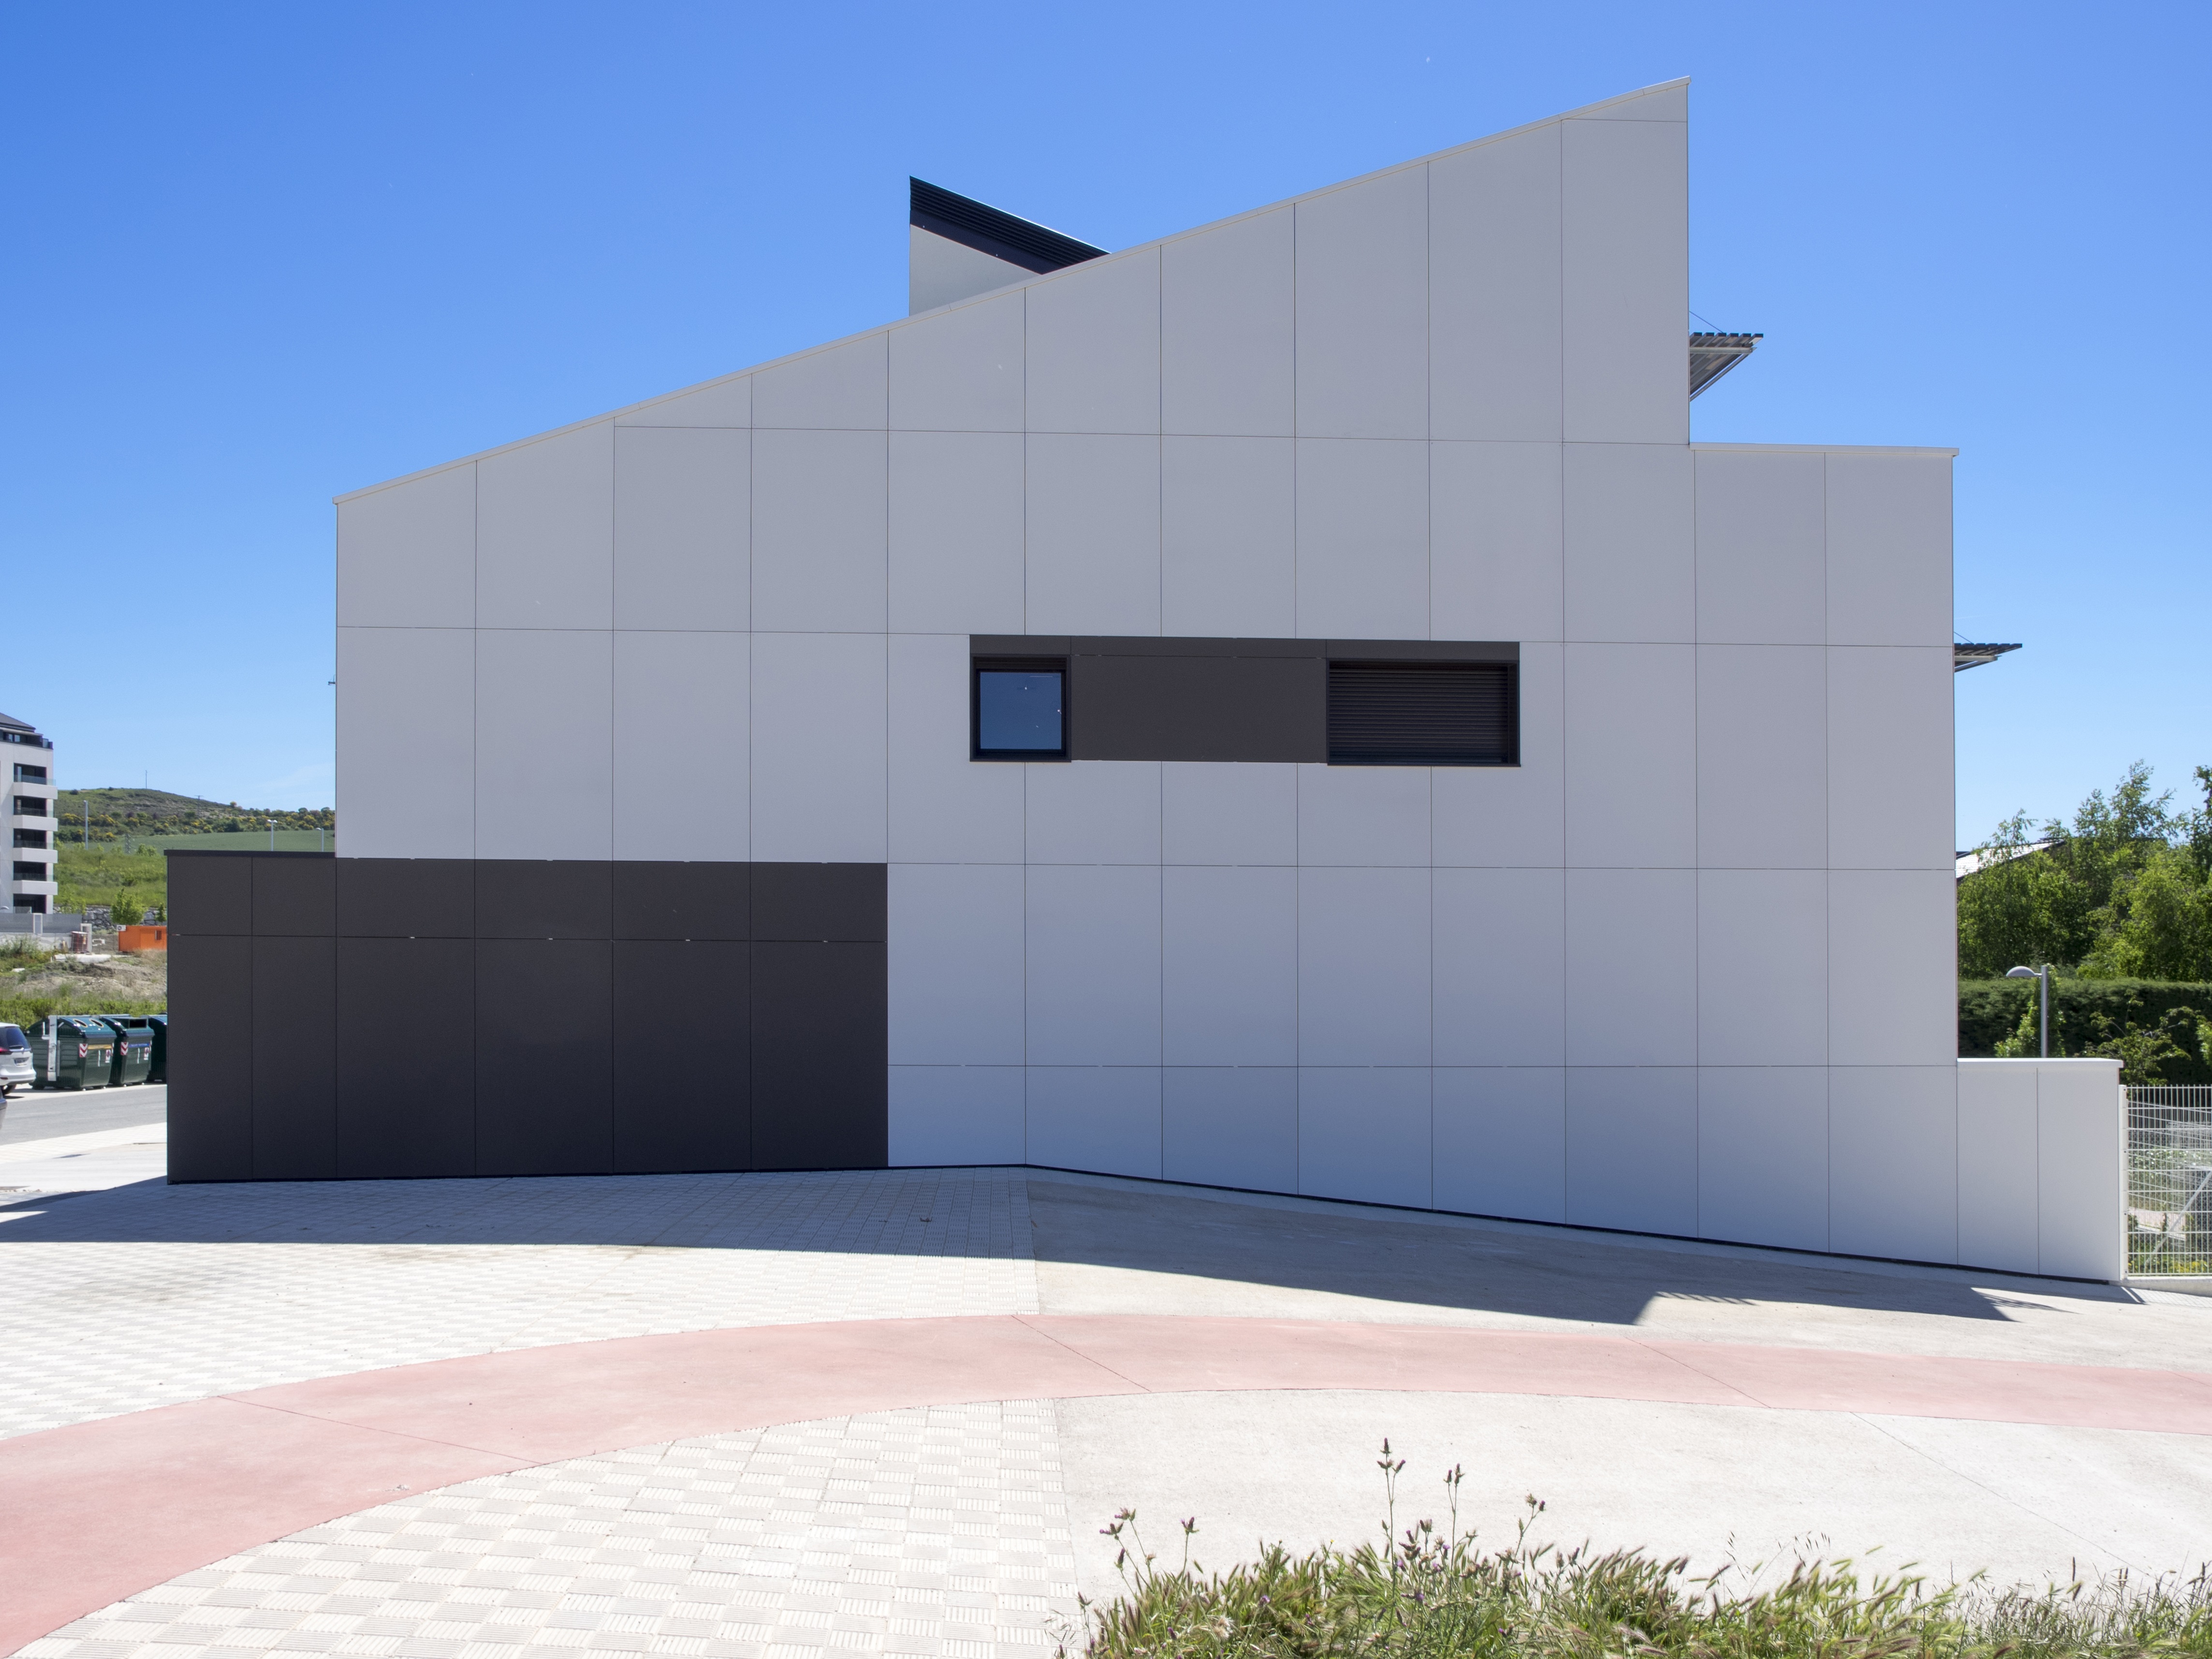 EQUITONE works with architects to launch new, Quartz White shade